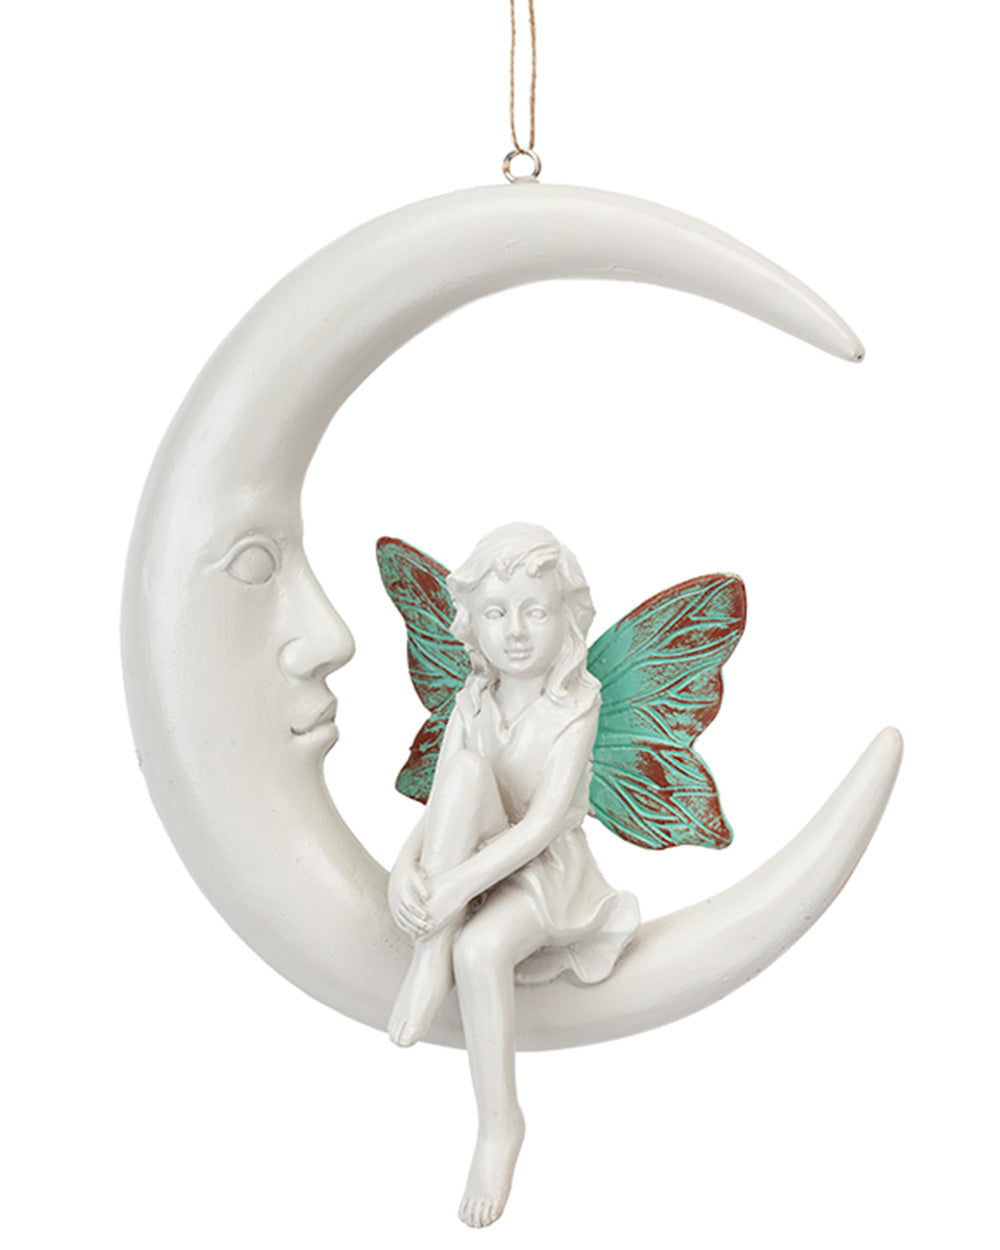 Fairy sitting on a moon with colourful wings, hanging garden ornament displayed on a white background